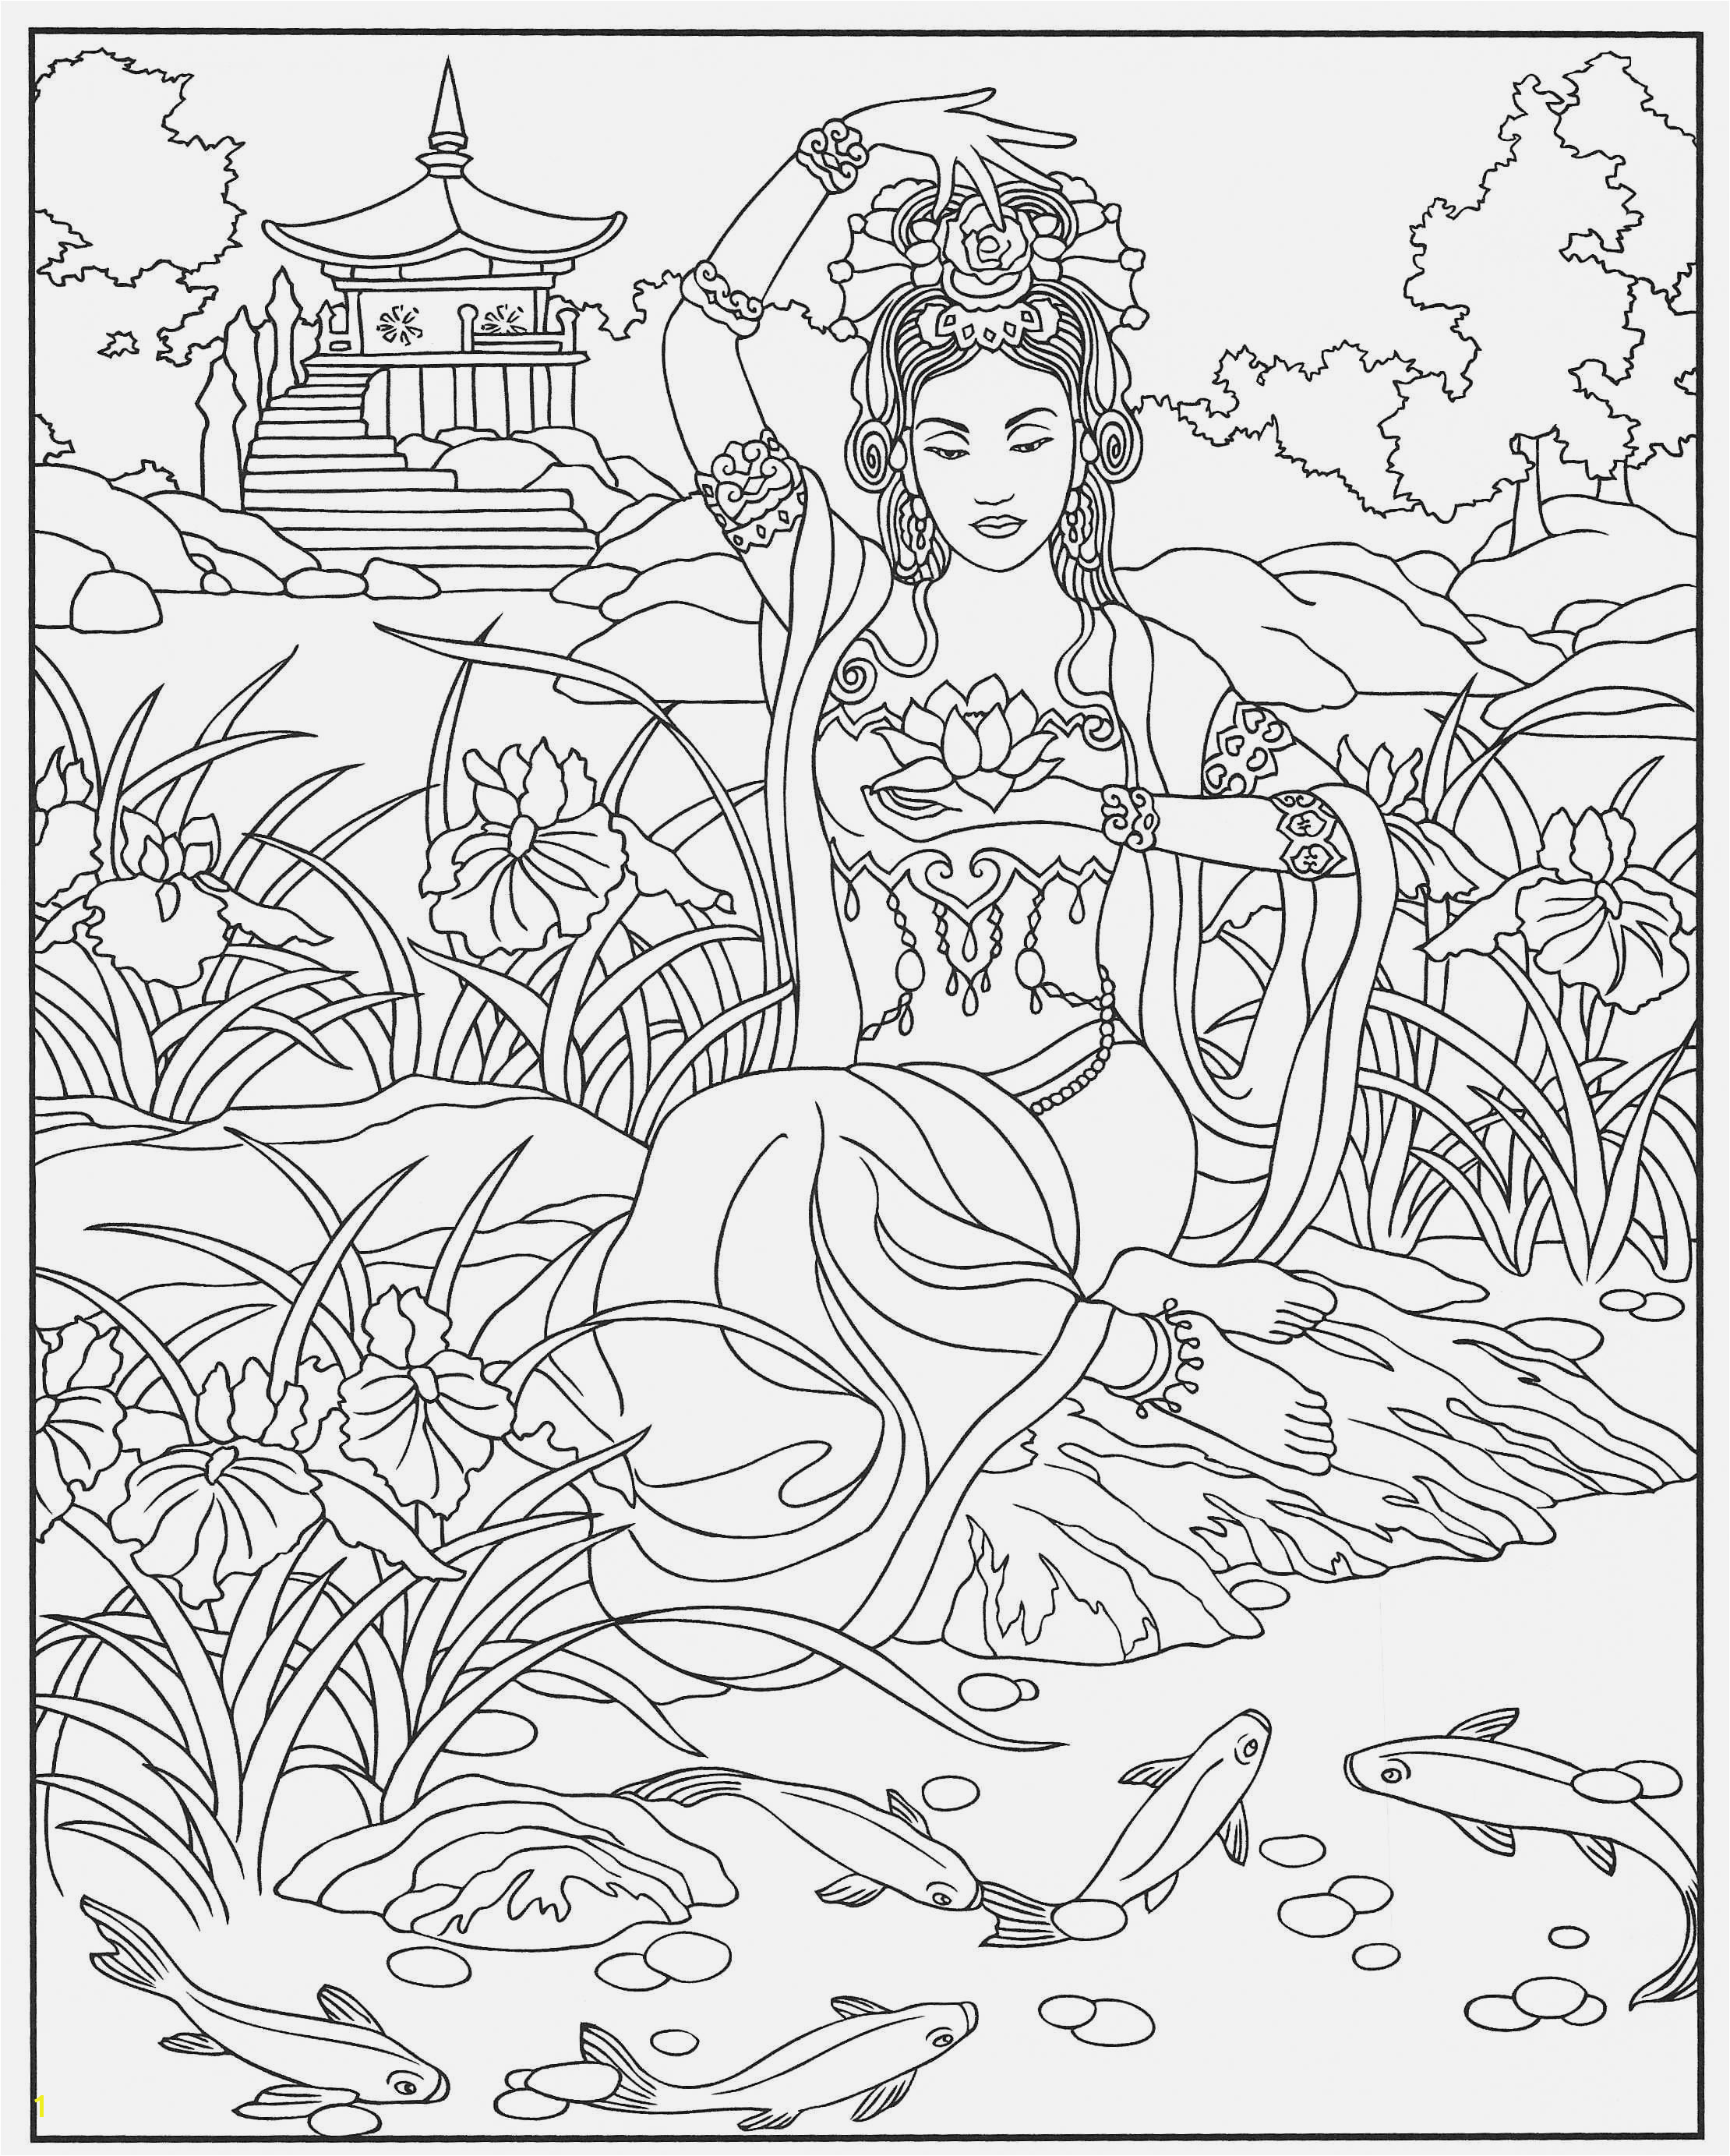 Black Women Coloring Pages Pretty Coloring Pages Printable Preschool Coloring Pages Fresh Fall